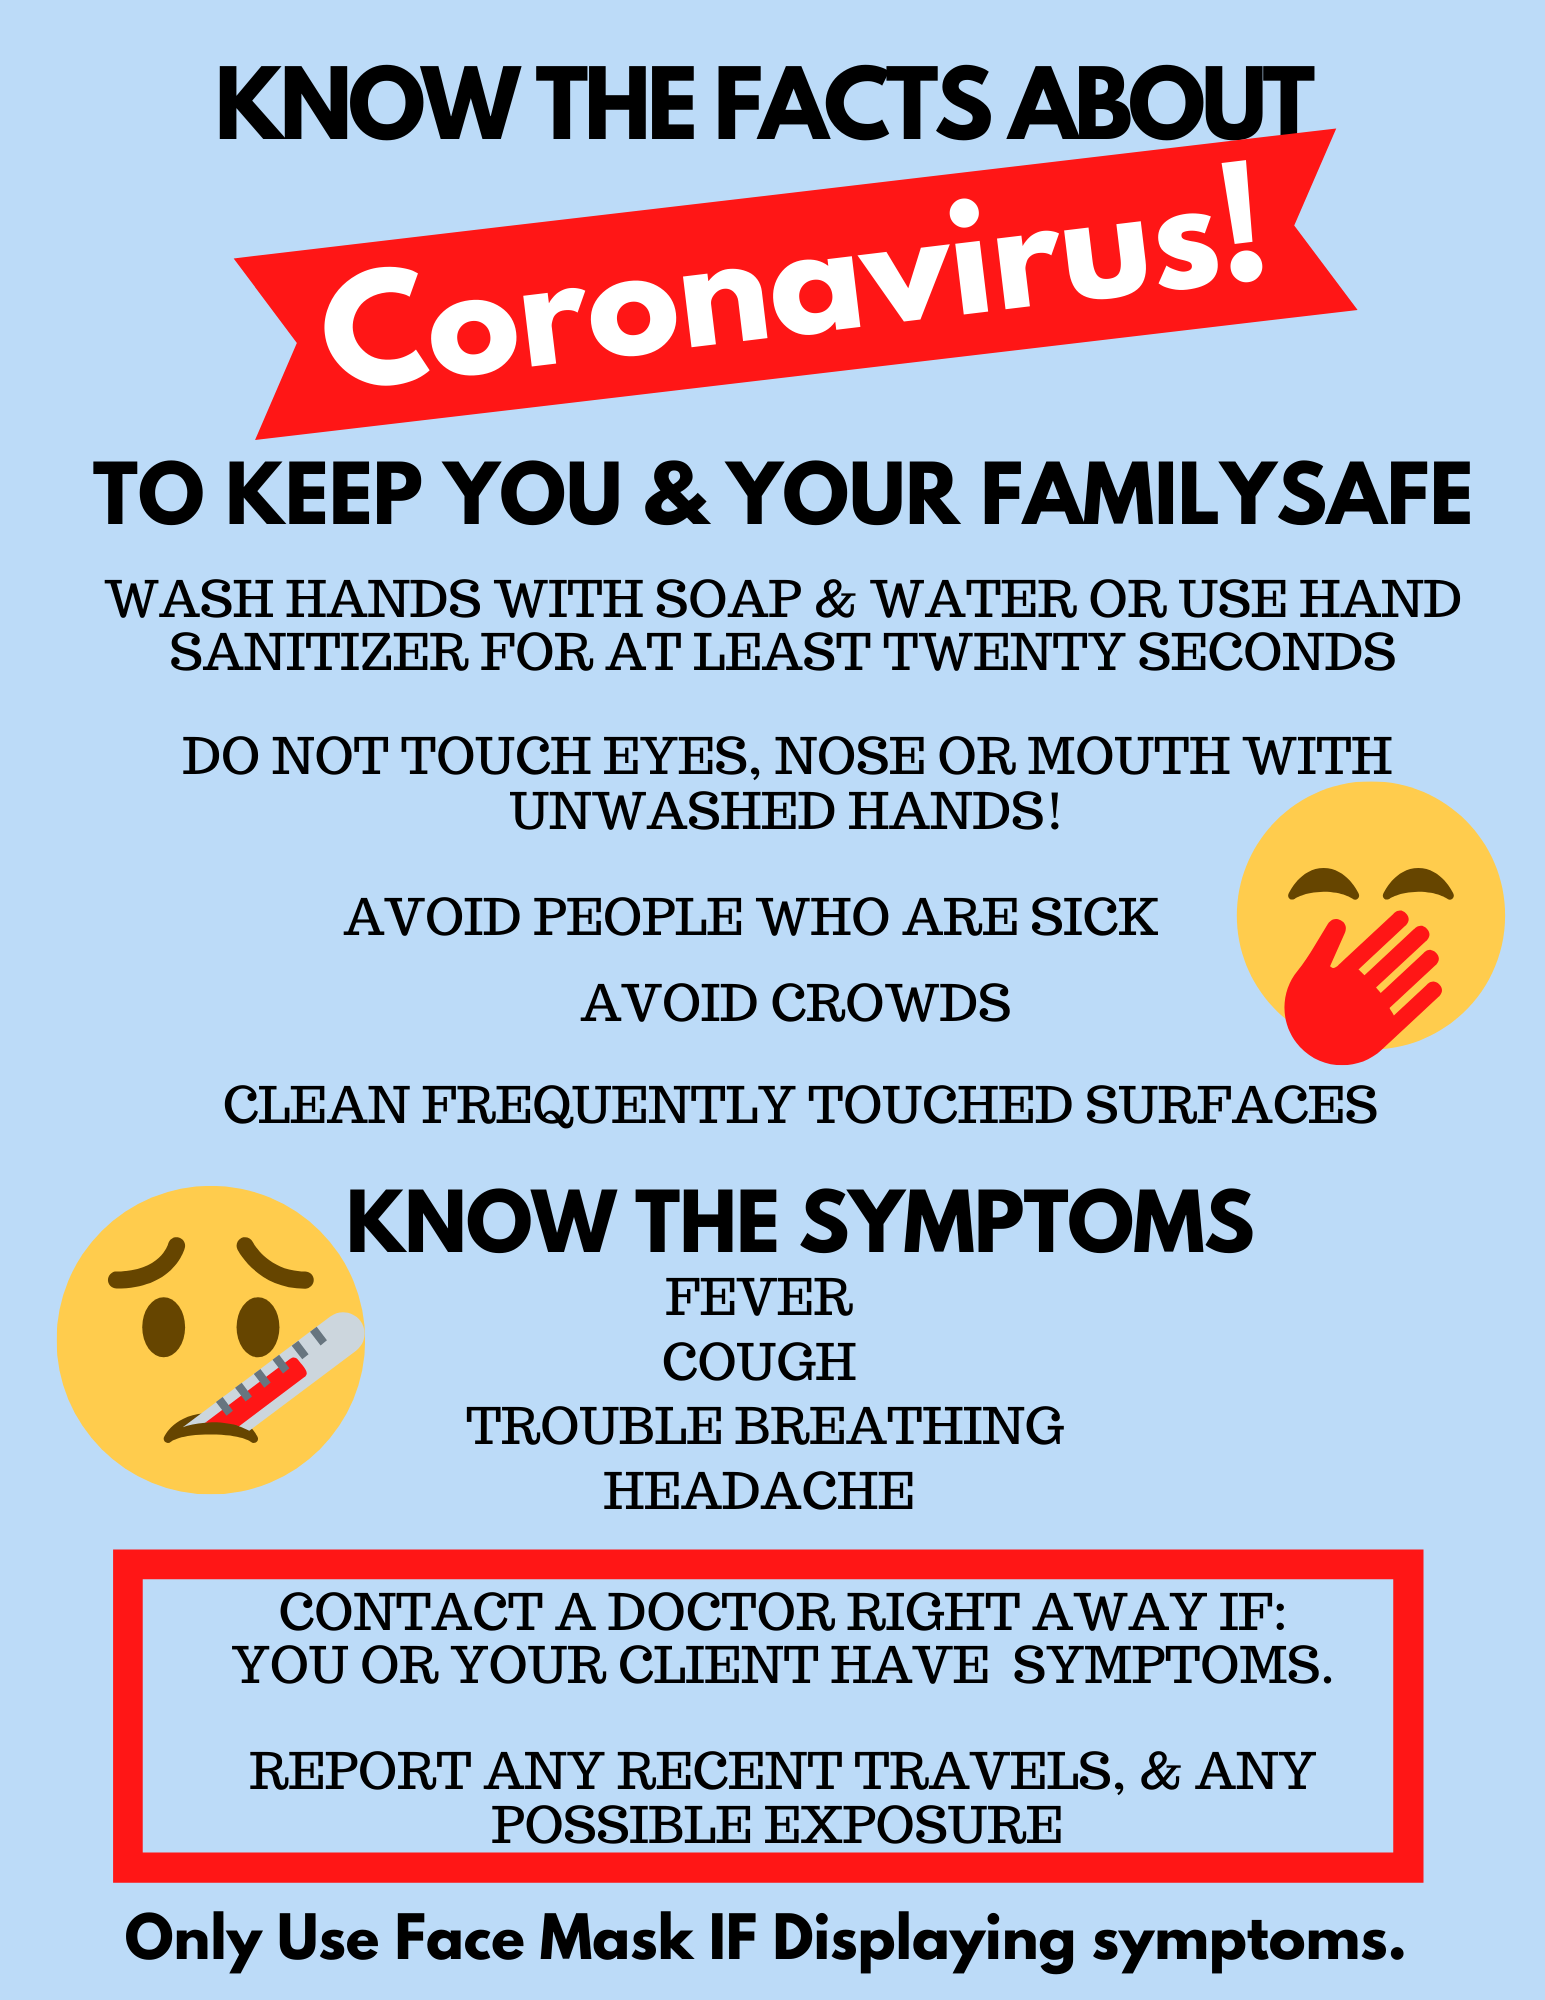 Home Care Boca Raton wants you to know the facts about coronavirus 